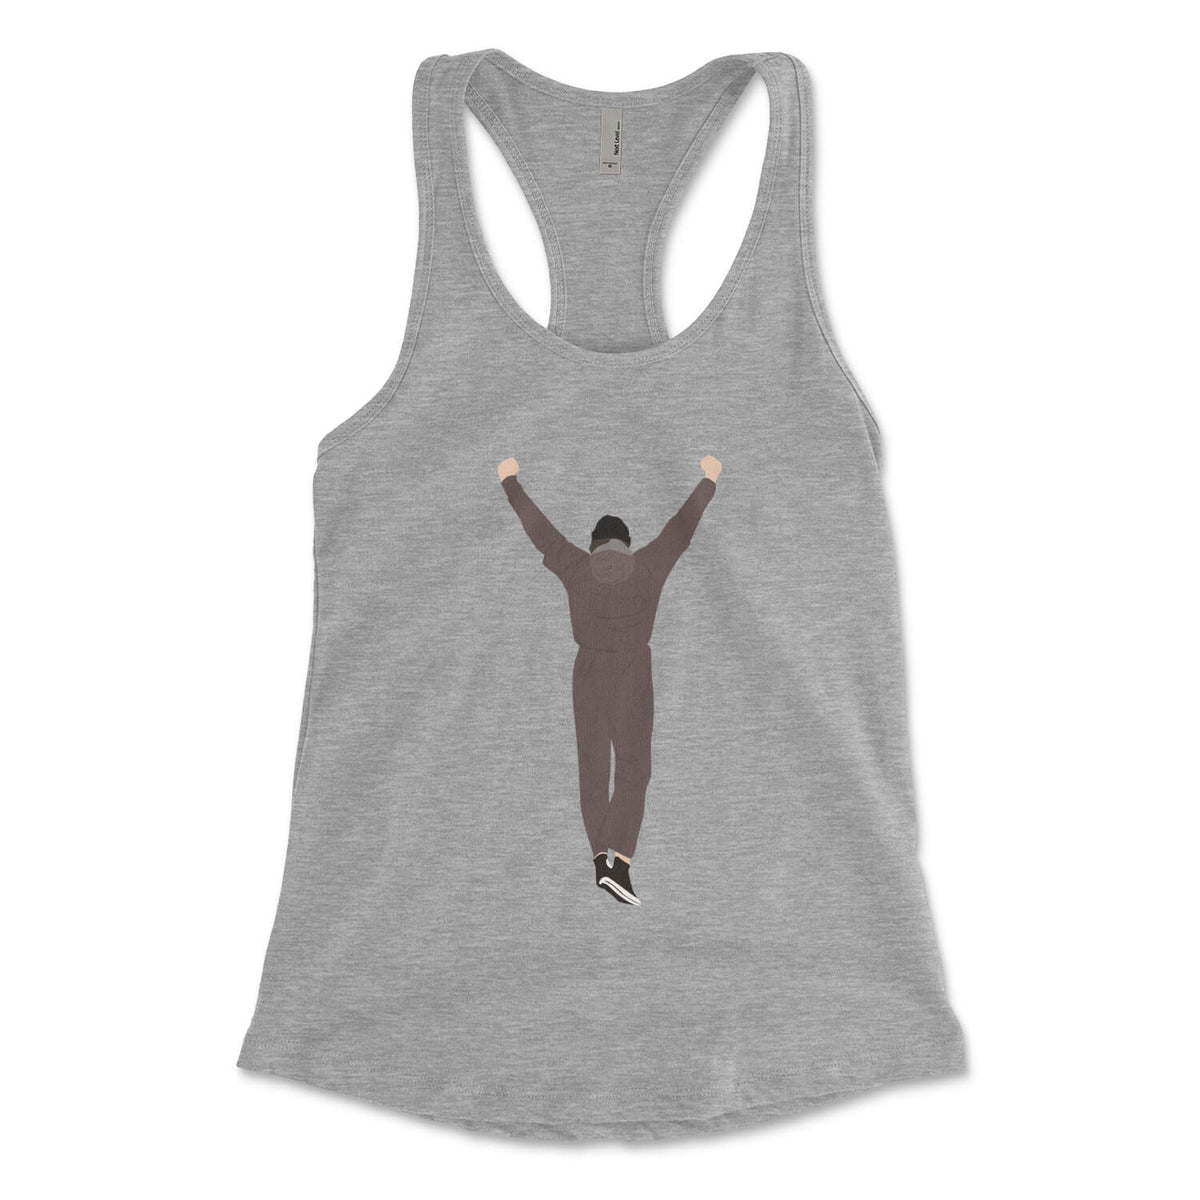 Rocky heather grey womens racerback tank top from Phillygoat